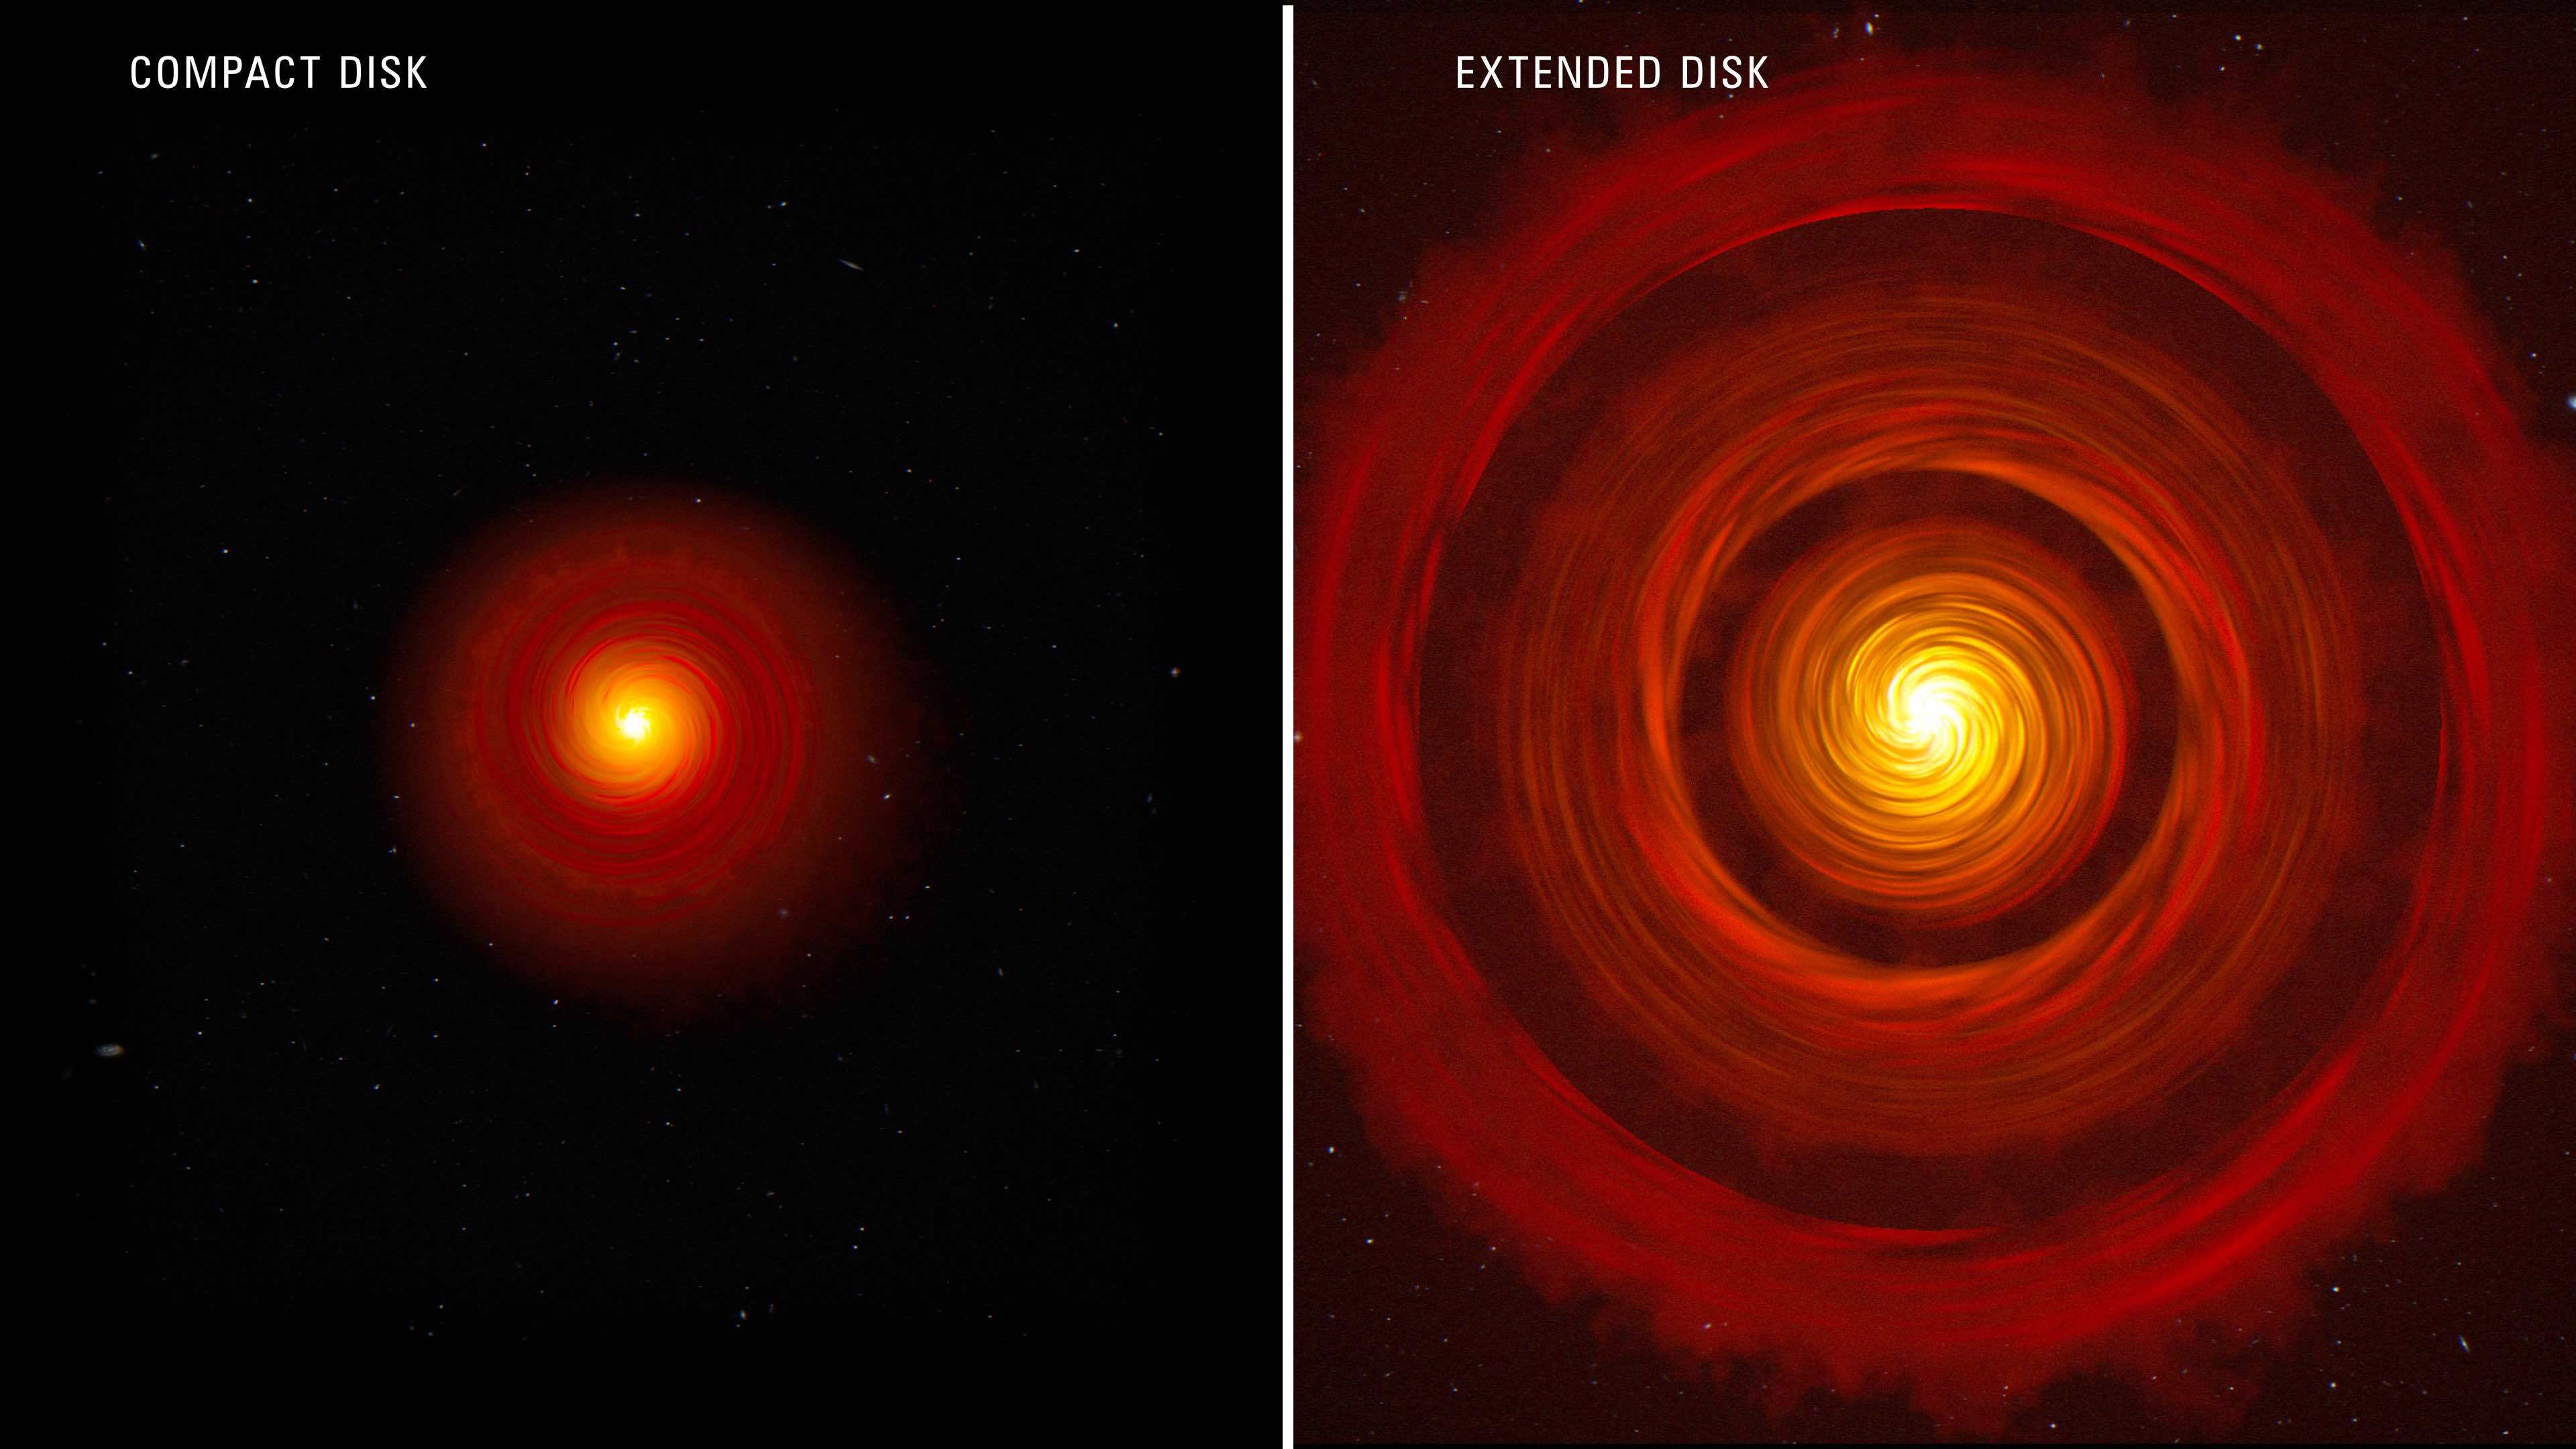 This artist’s concept compares two types of typical, planet-forming disks around newborn, Sun-like stars. On the left is a compact disk, and on the right is an extended disk with gaps.